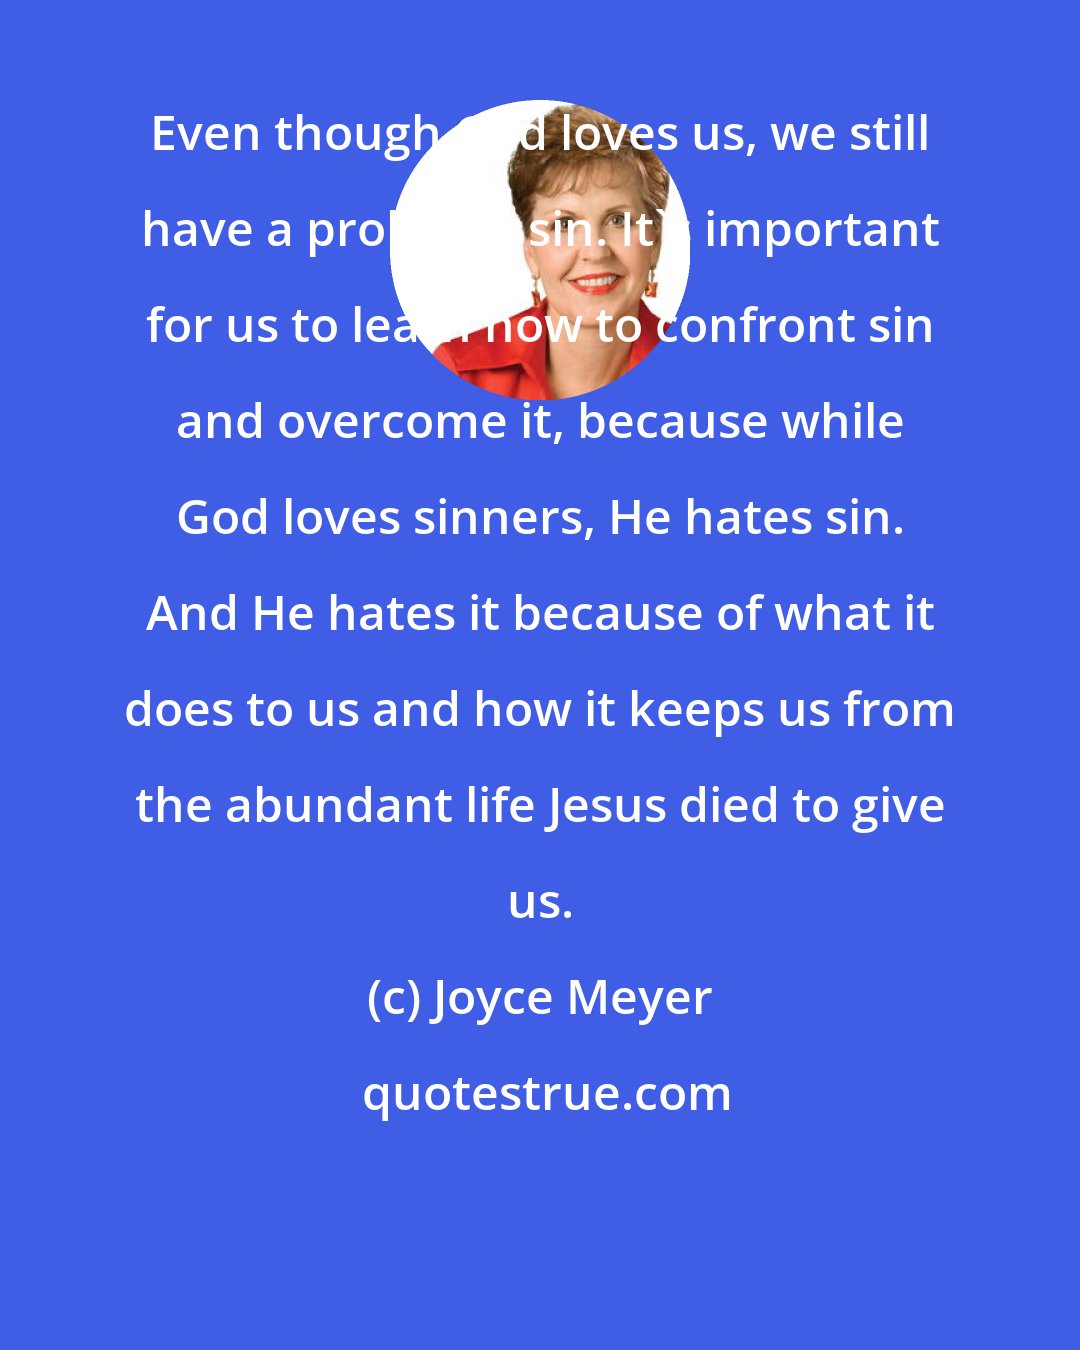 Joyce Meyer: Even though God loves us, we still have a problem: sin. It's important for us to learn how to confront sin and overcome it, because while God loves sinners, He hates sin. And He hates it because of what it does to us and how it keeps us from the abundant life Jesus died to give us.